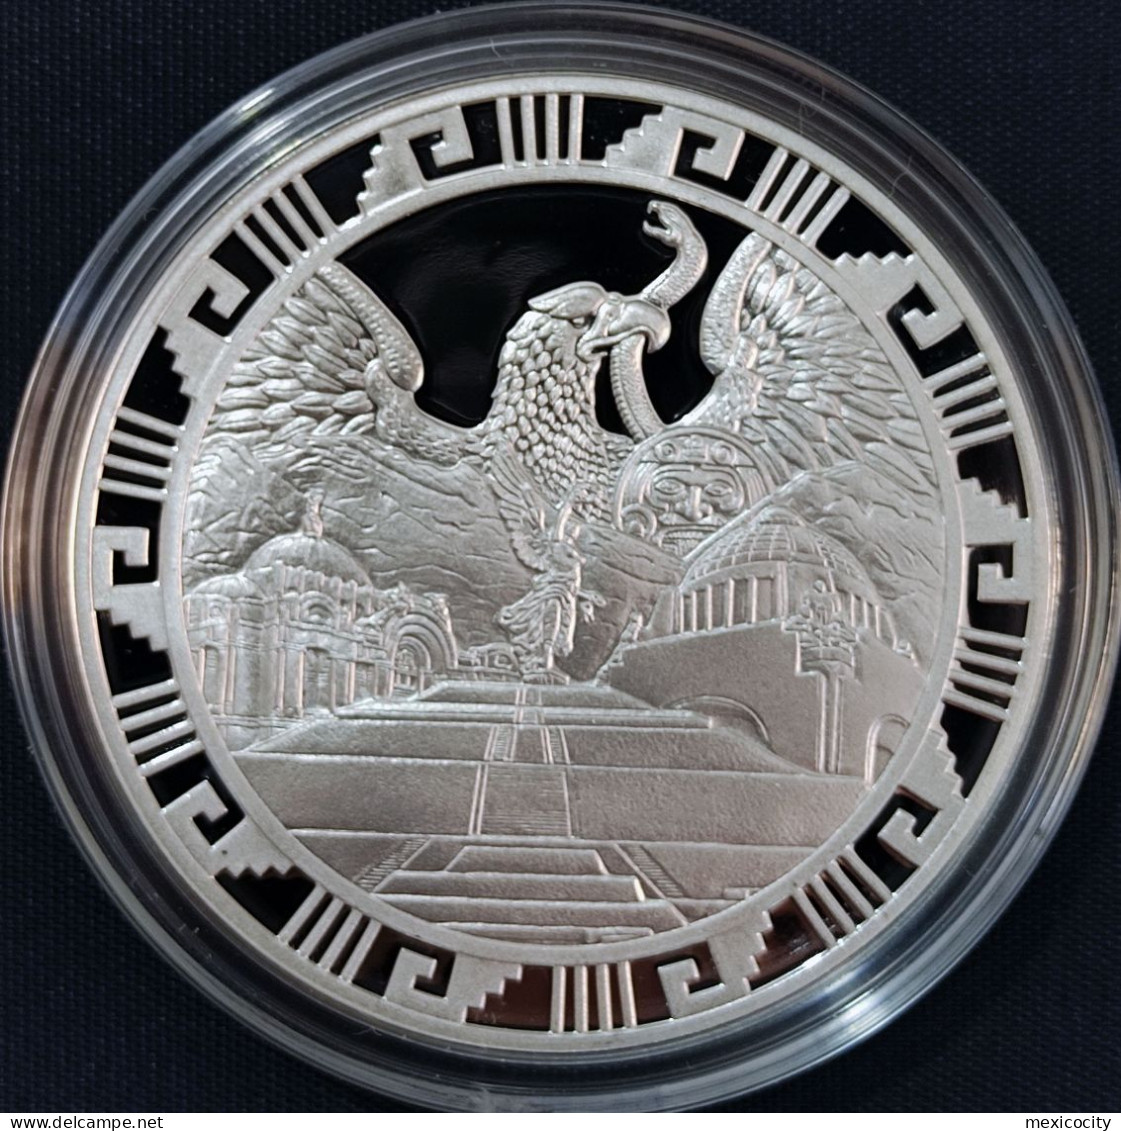 MEXICO Mint MEXICAN LANDSCAPE & WINGED VICTORY Deep Cameo Luxury .999 Silver Oz. PROOF Encapsulated - Mexique